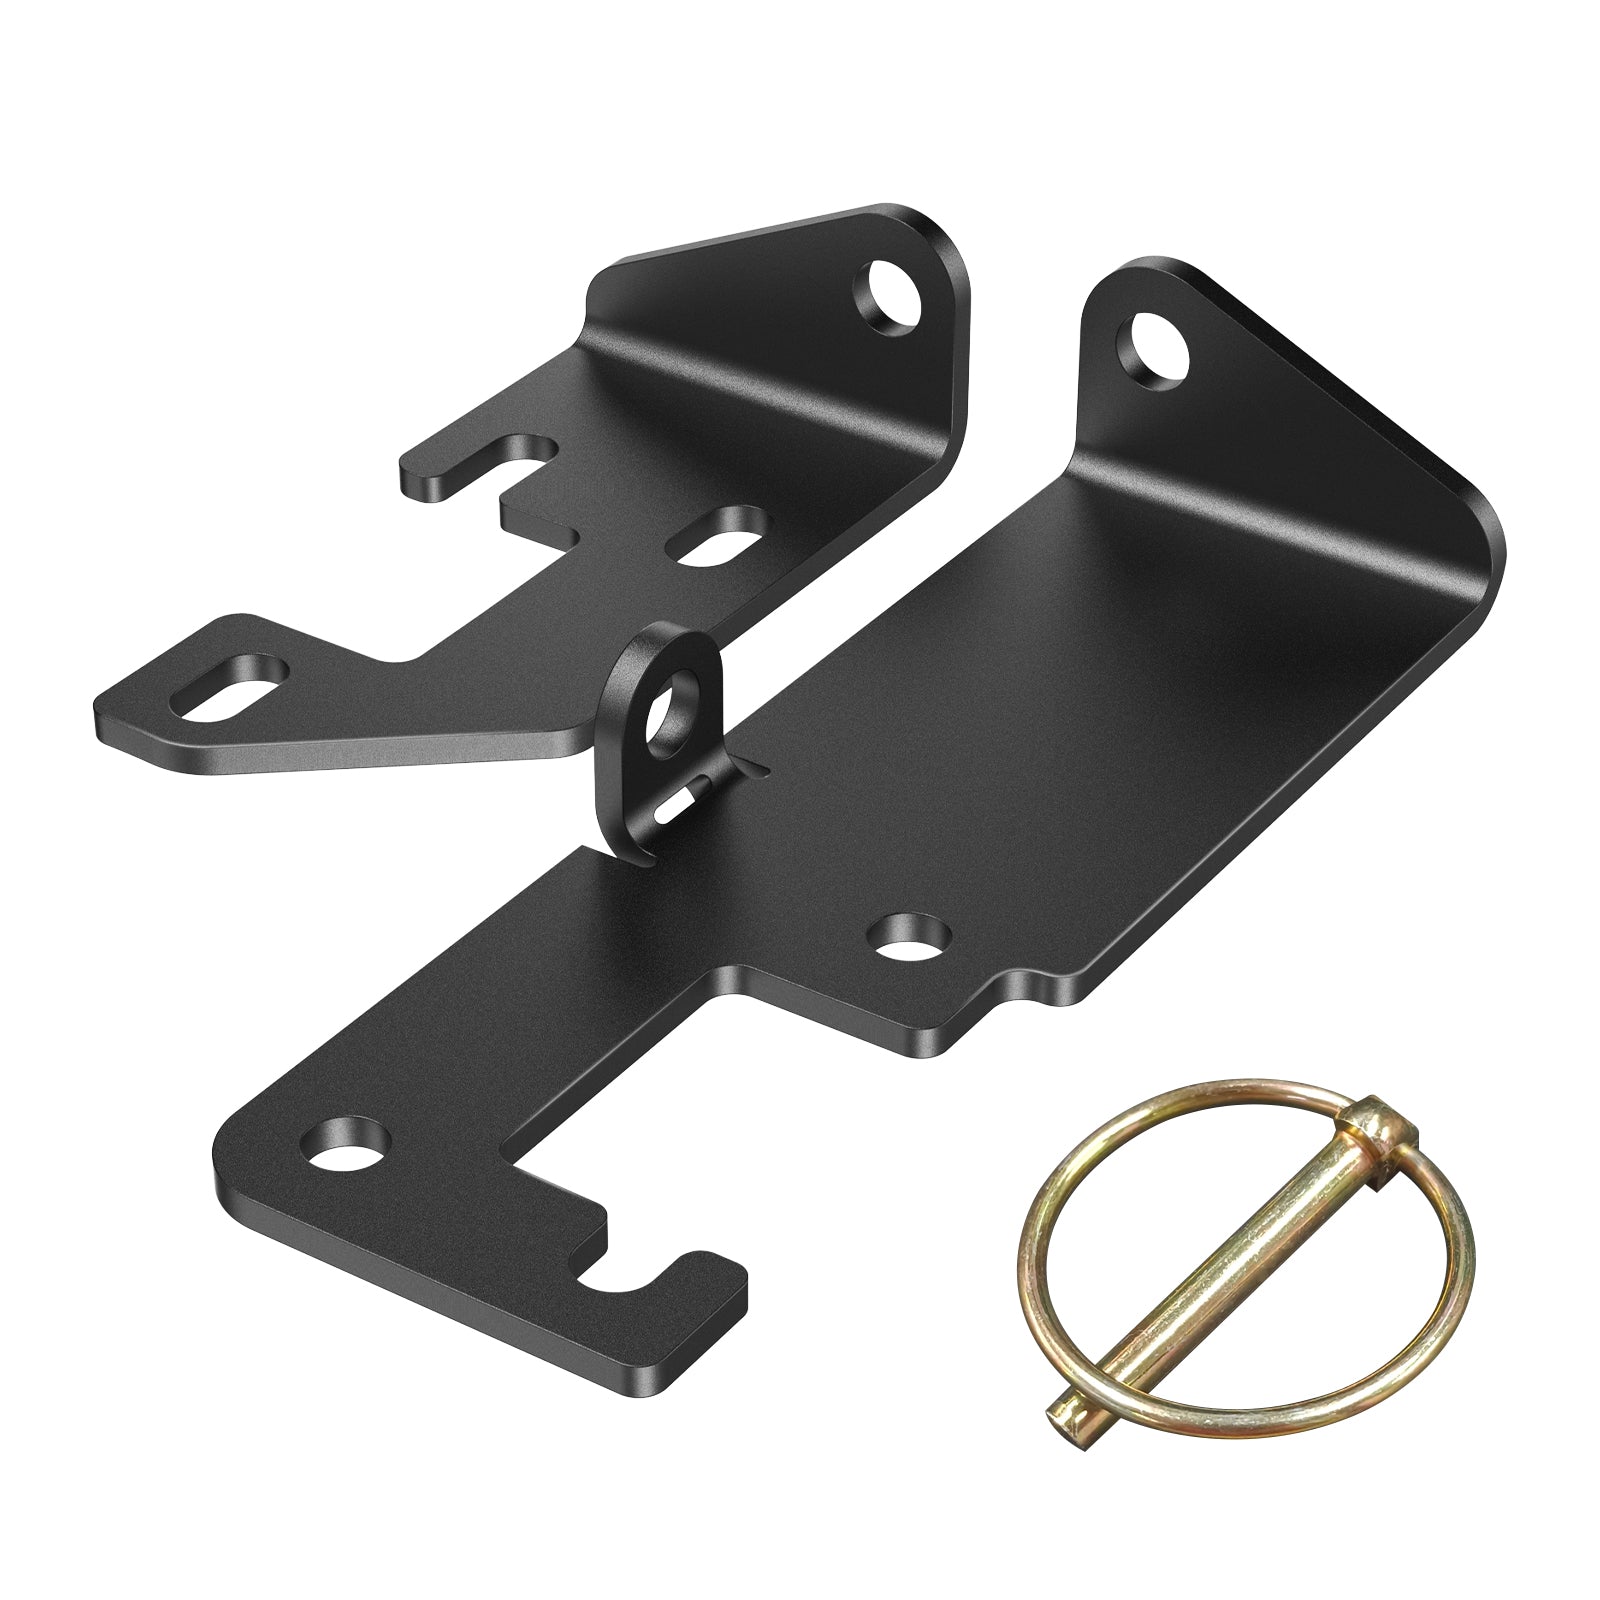 BEVINSEE 3mm Tailgate Rear Door Lock for Ducato Jumper Boxer X250 H1 H2 Roof